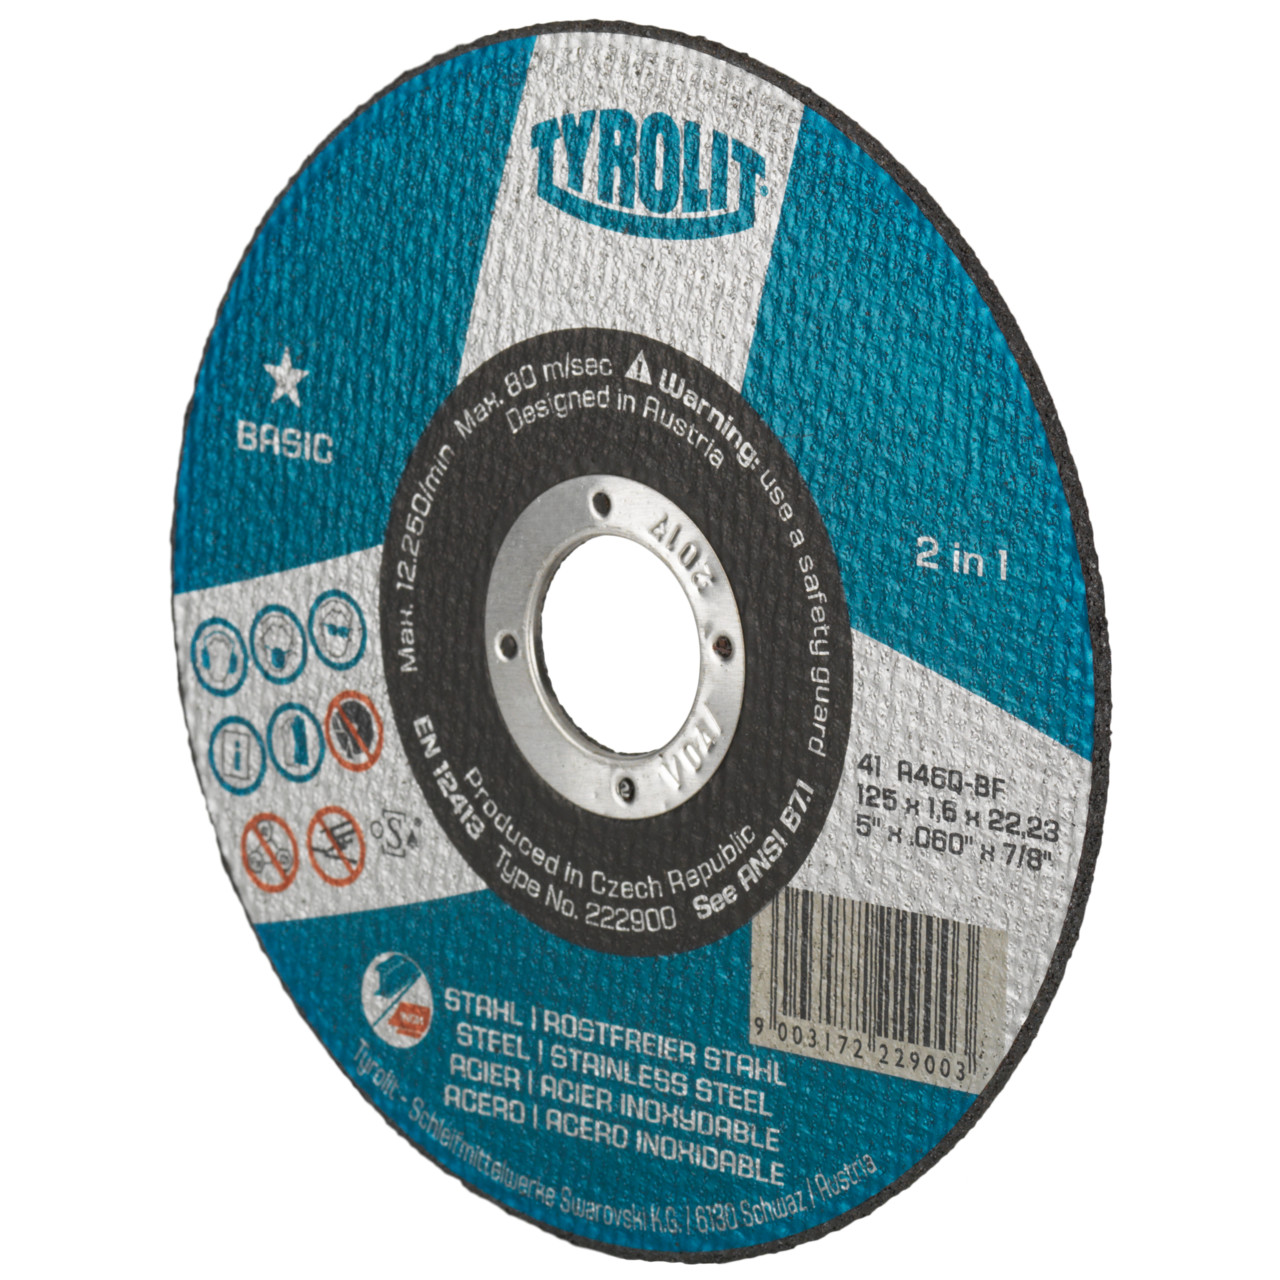 Tyrolit Cutting discs DxDxH 230x1.9x22.23 2in1 for steel and stainless steel, shape: 41 - straight version, Art. 34332876